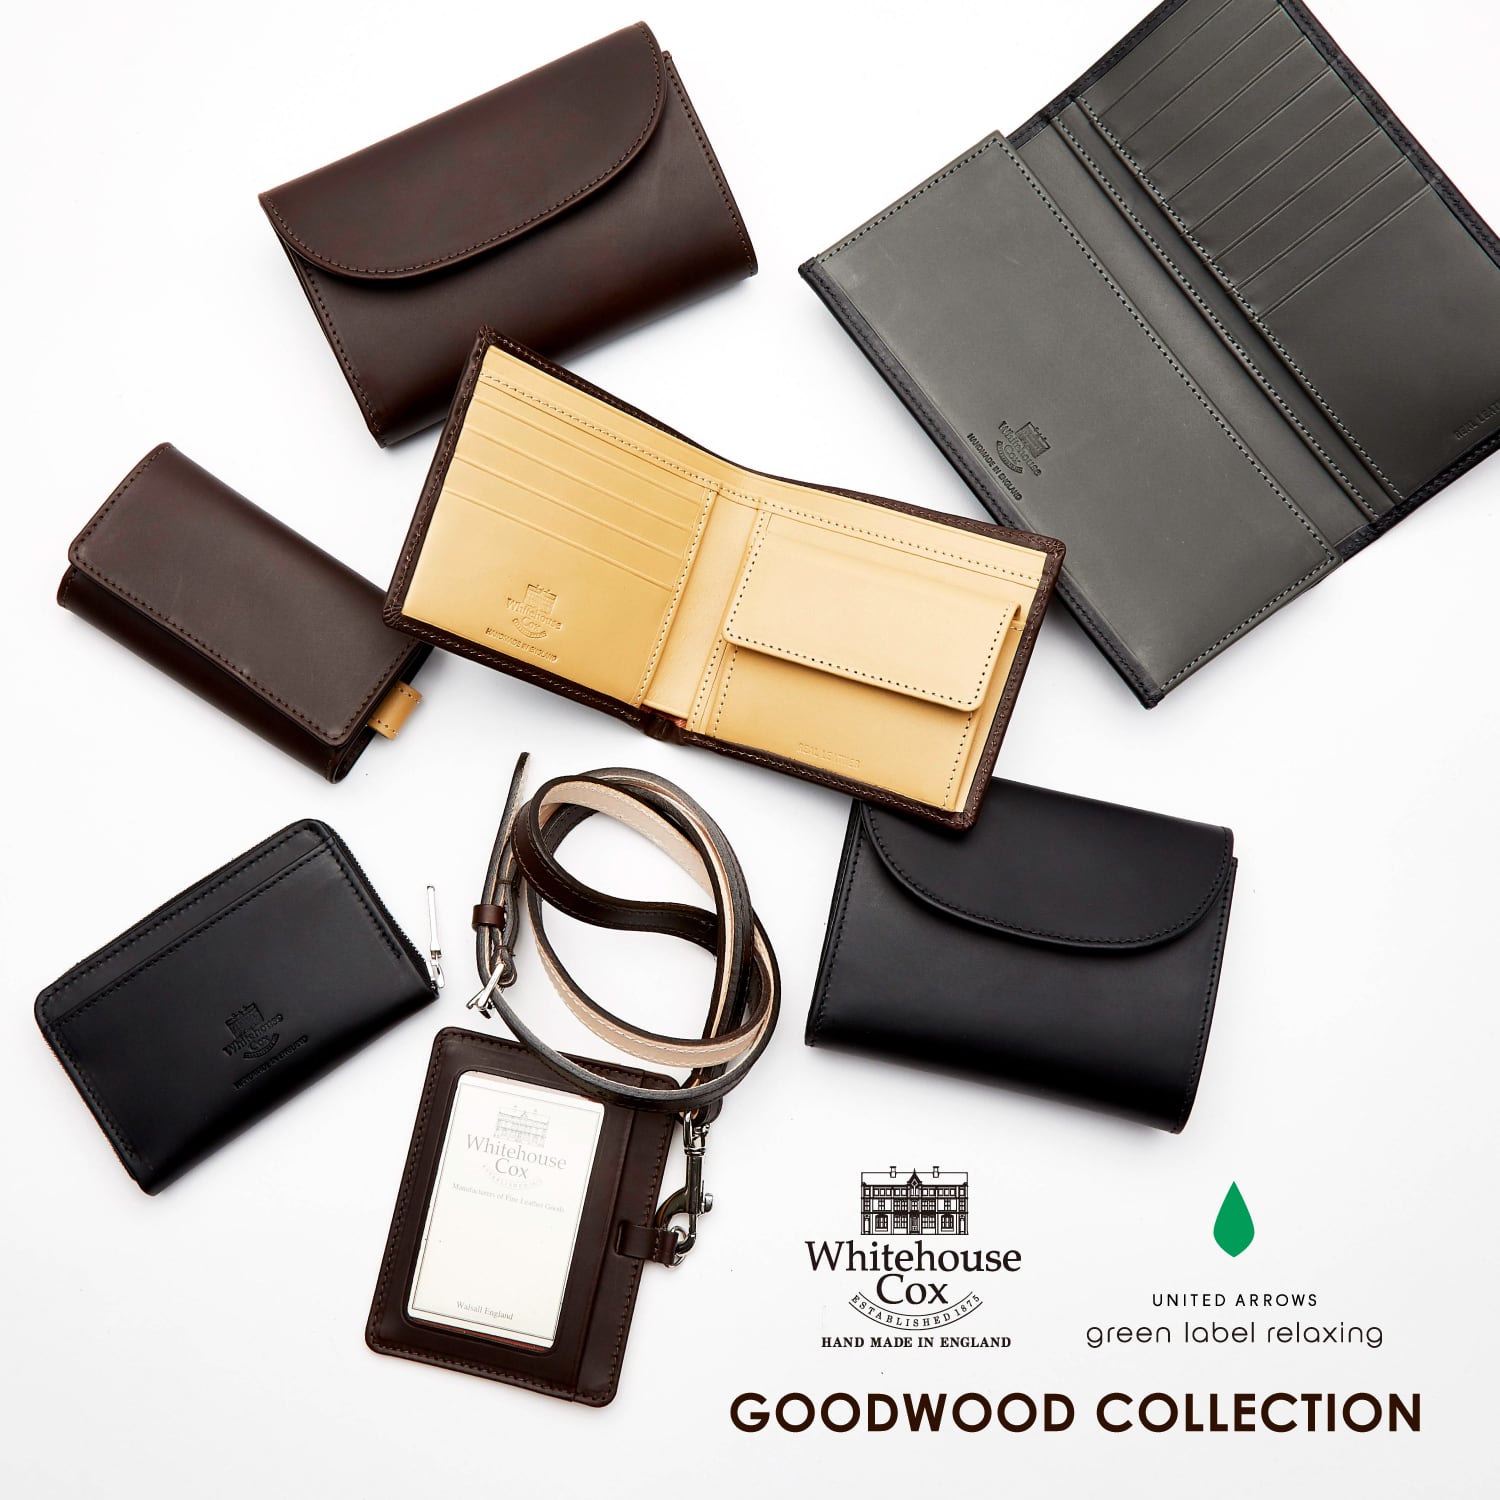 Whitehouse Cox × UNITED ARROWS green label relaxing　GOODWOOD COLLECTION 2019